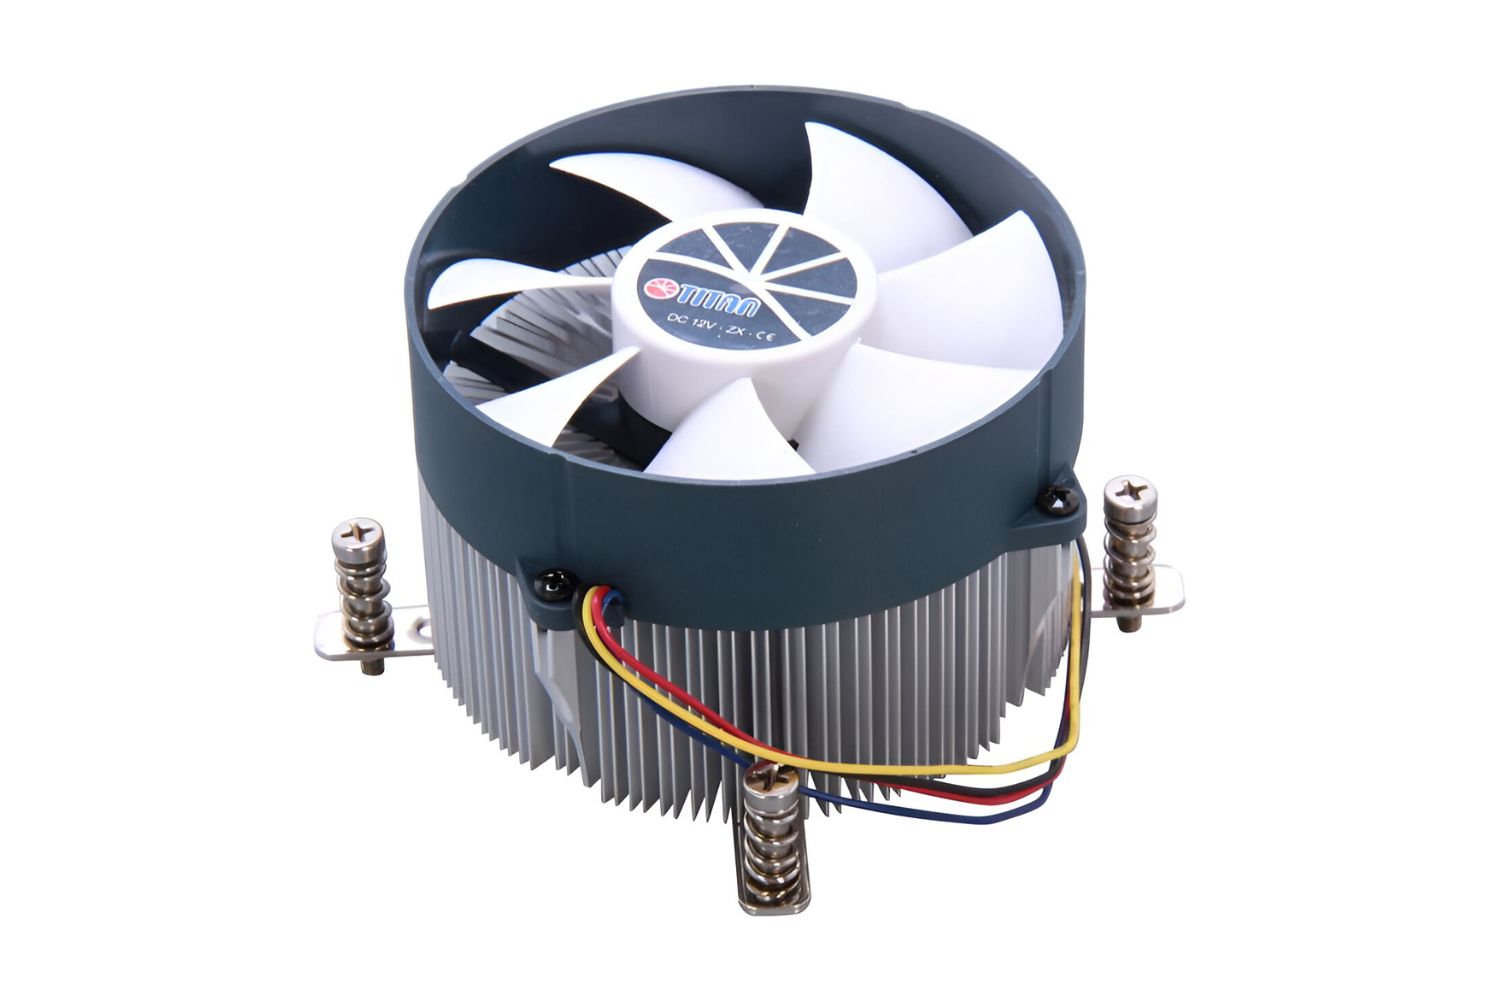 how-big-does-case-need-to-be-to-fit-titan-ttc-na43tz-cu35-95mm-z-axis-cpu-cooler